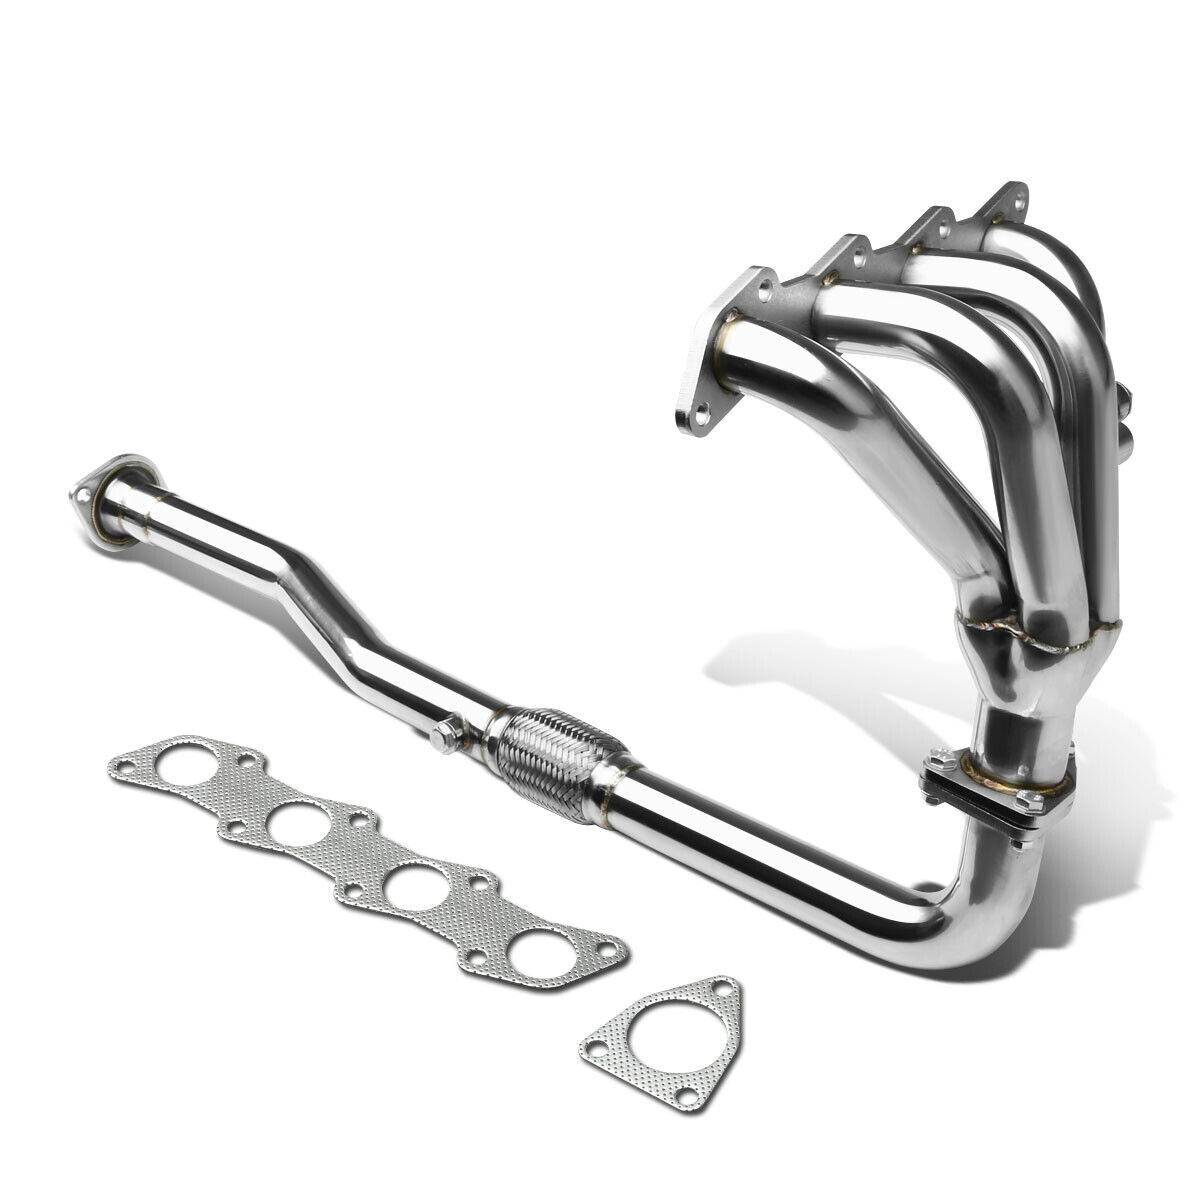 Fit 93-01 Altima 2.4 U13/L30 Ka24 4-1 Stainless Racing Header Exhaust Manifold